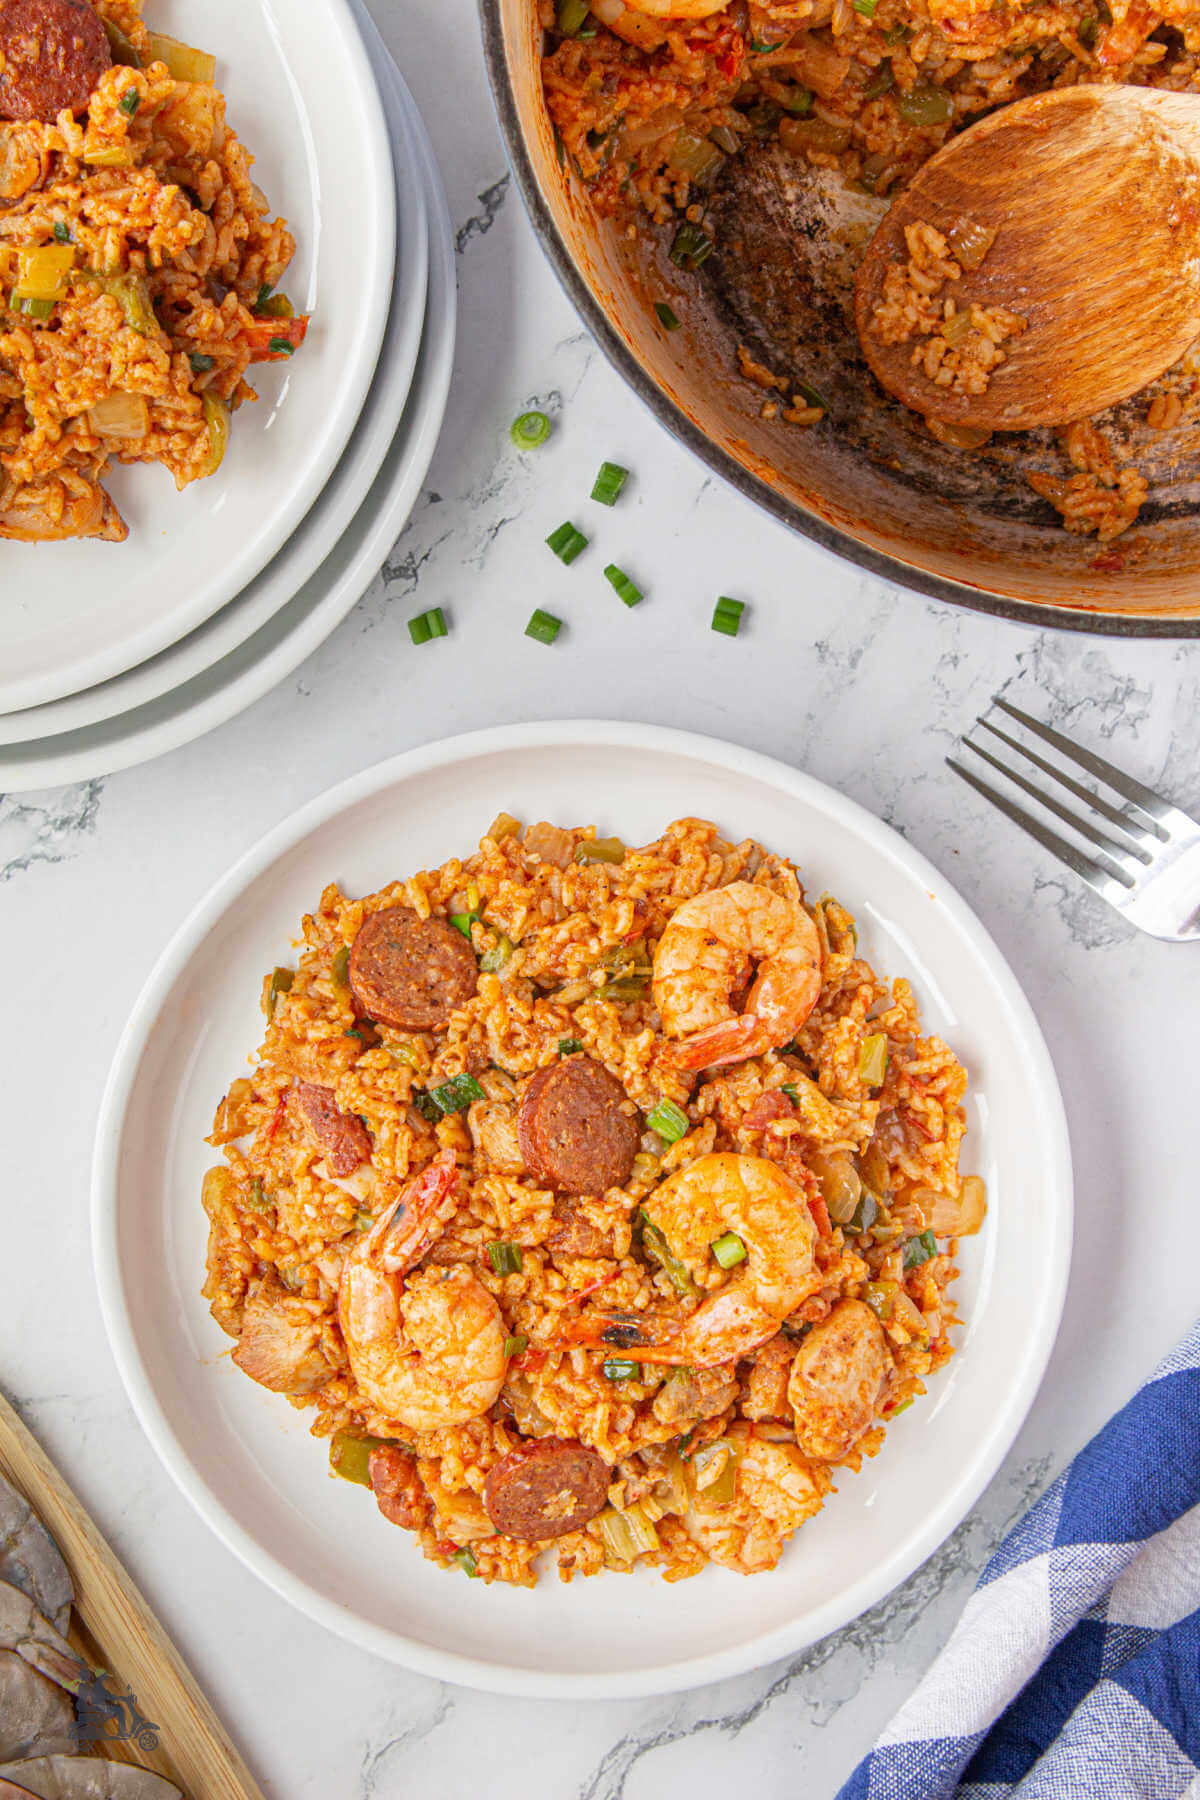 Two bowls filled with Cajun inspired Jambalaya recipe garnished with green onions.